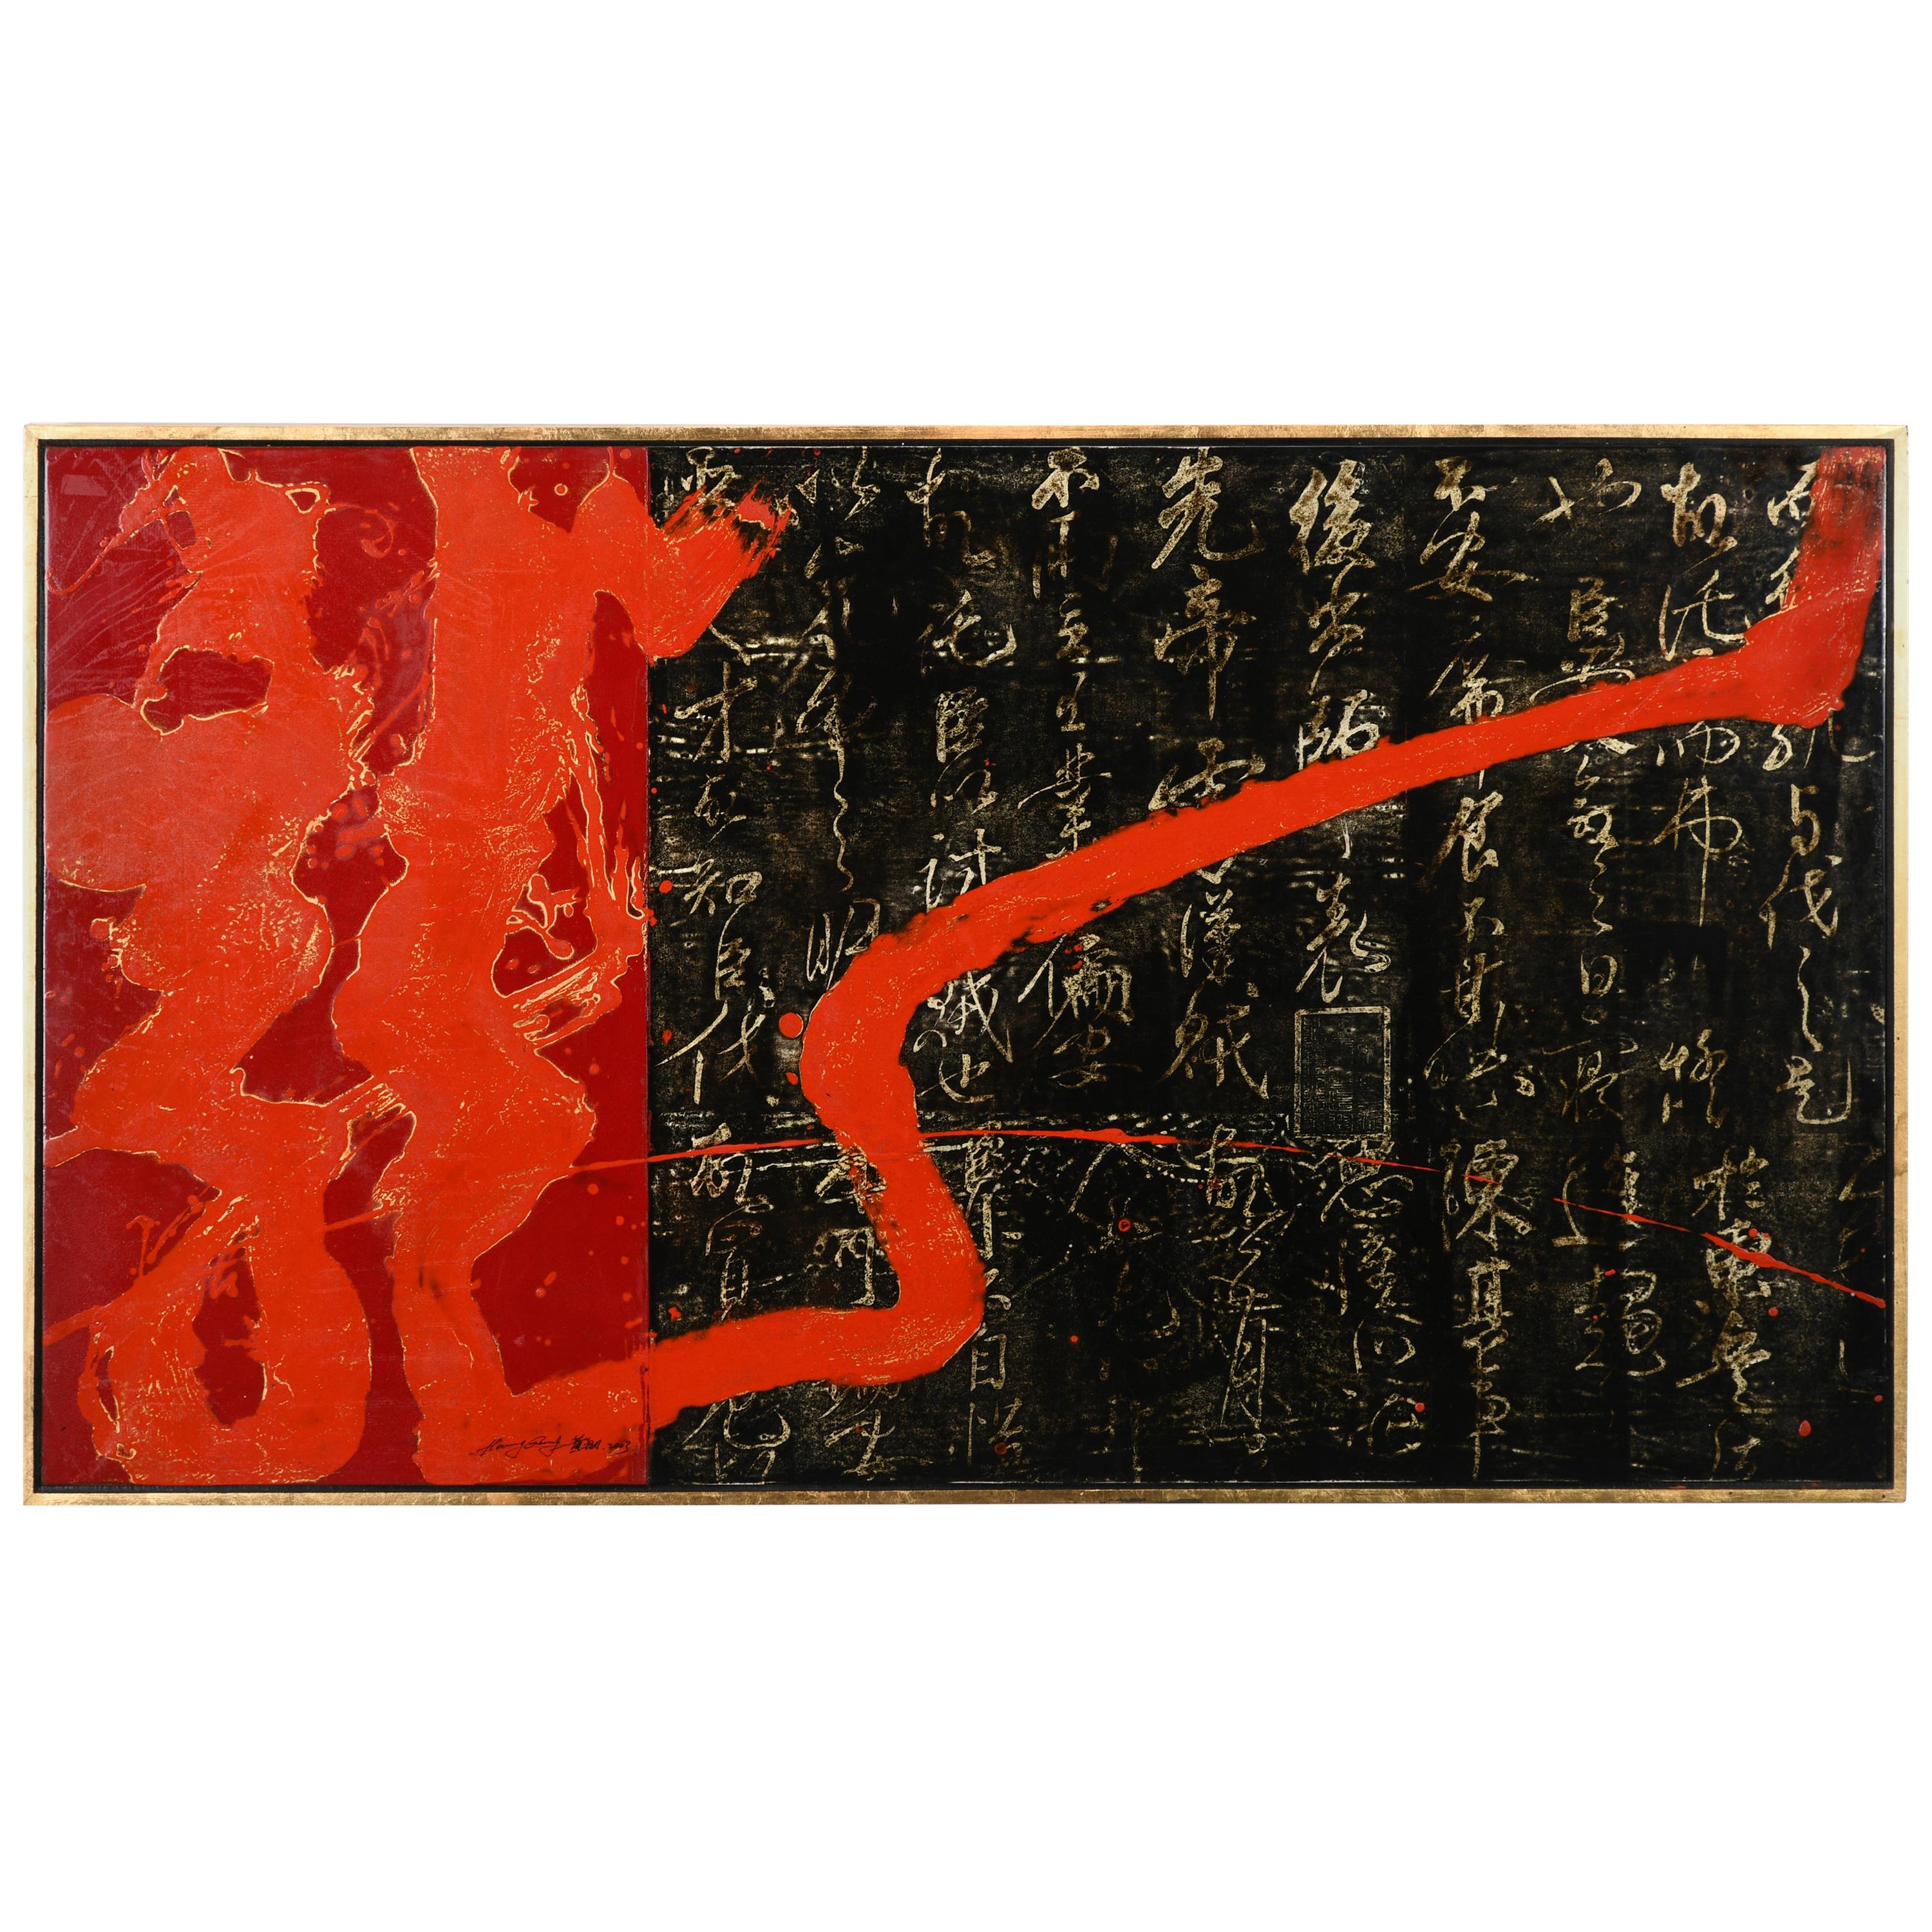 Signed Huang Gang Chinese Modernist Painting, 2003 For Sale